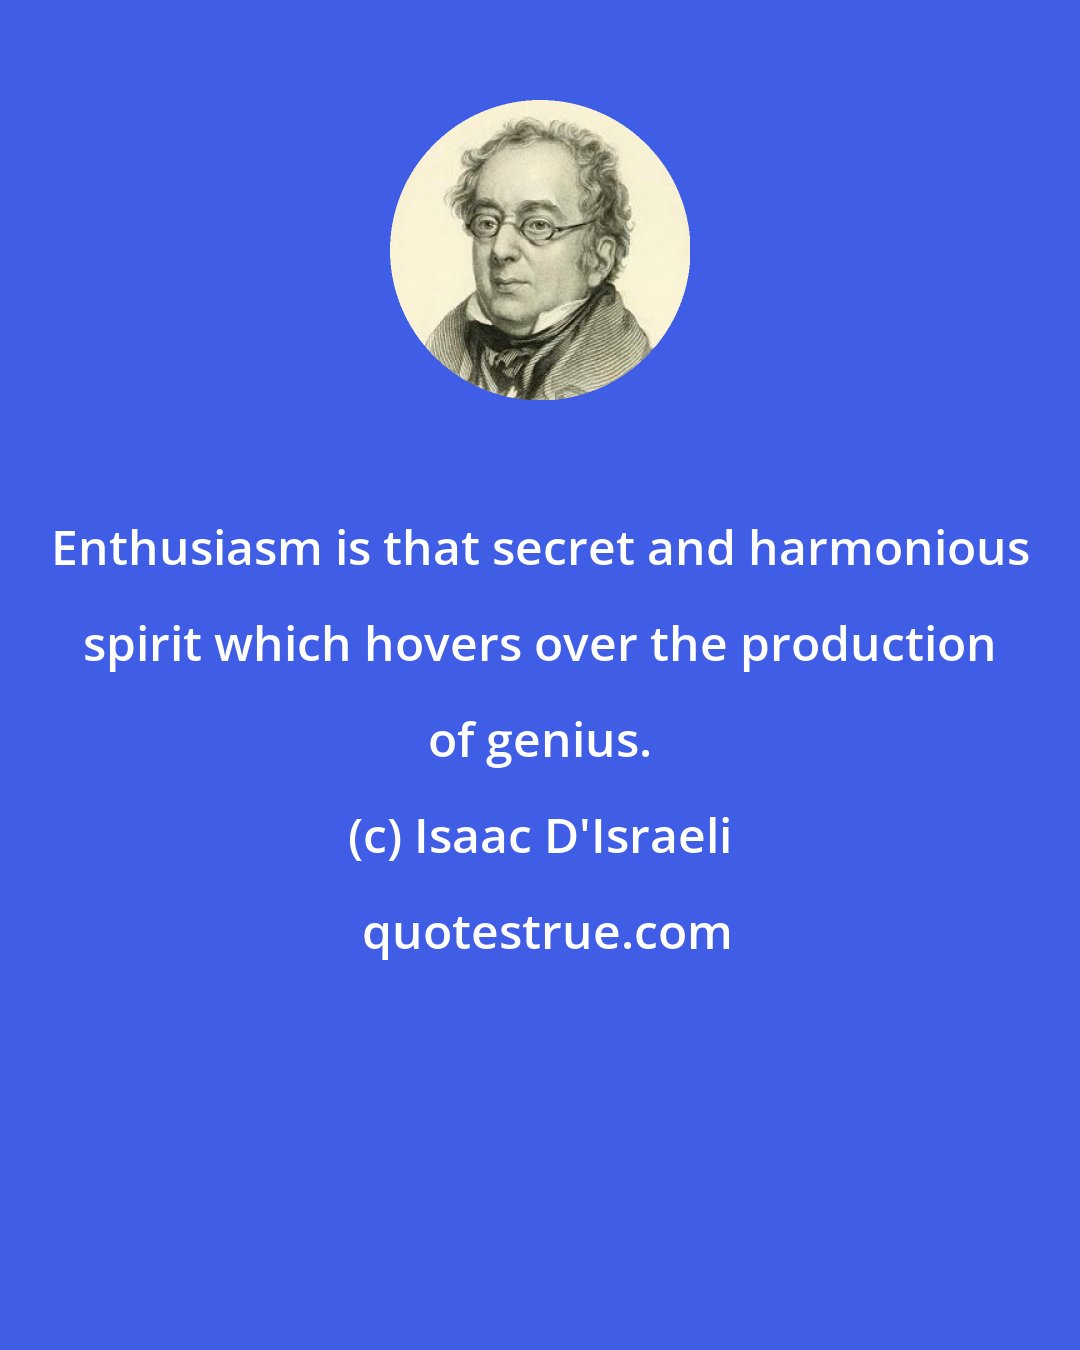 Isaac D'Israeli: Enthusiasm is that secret and harmonious spirit which hovers over the production of genius.